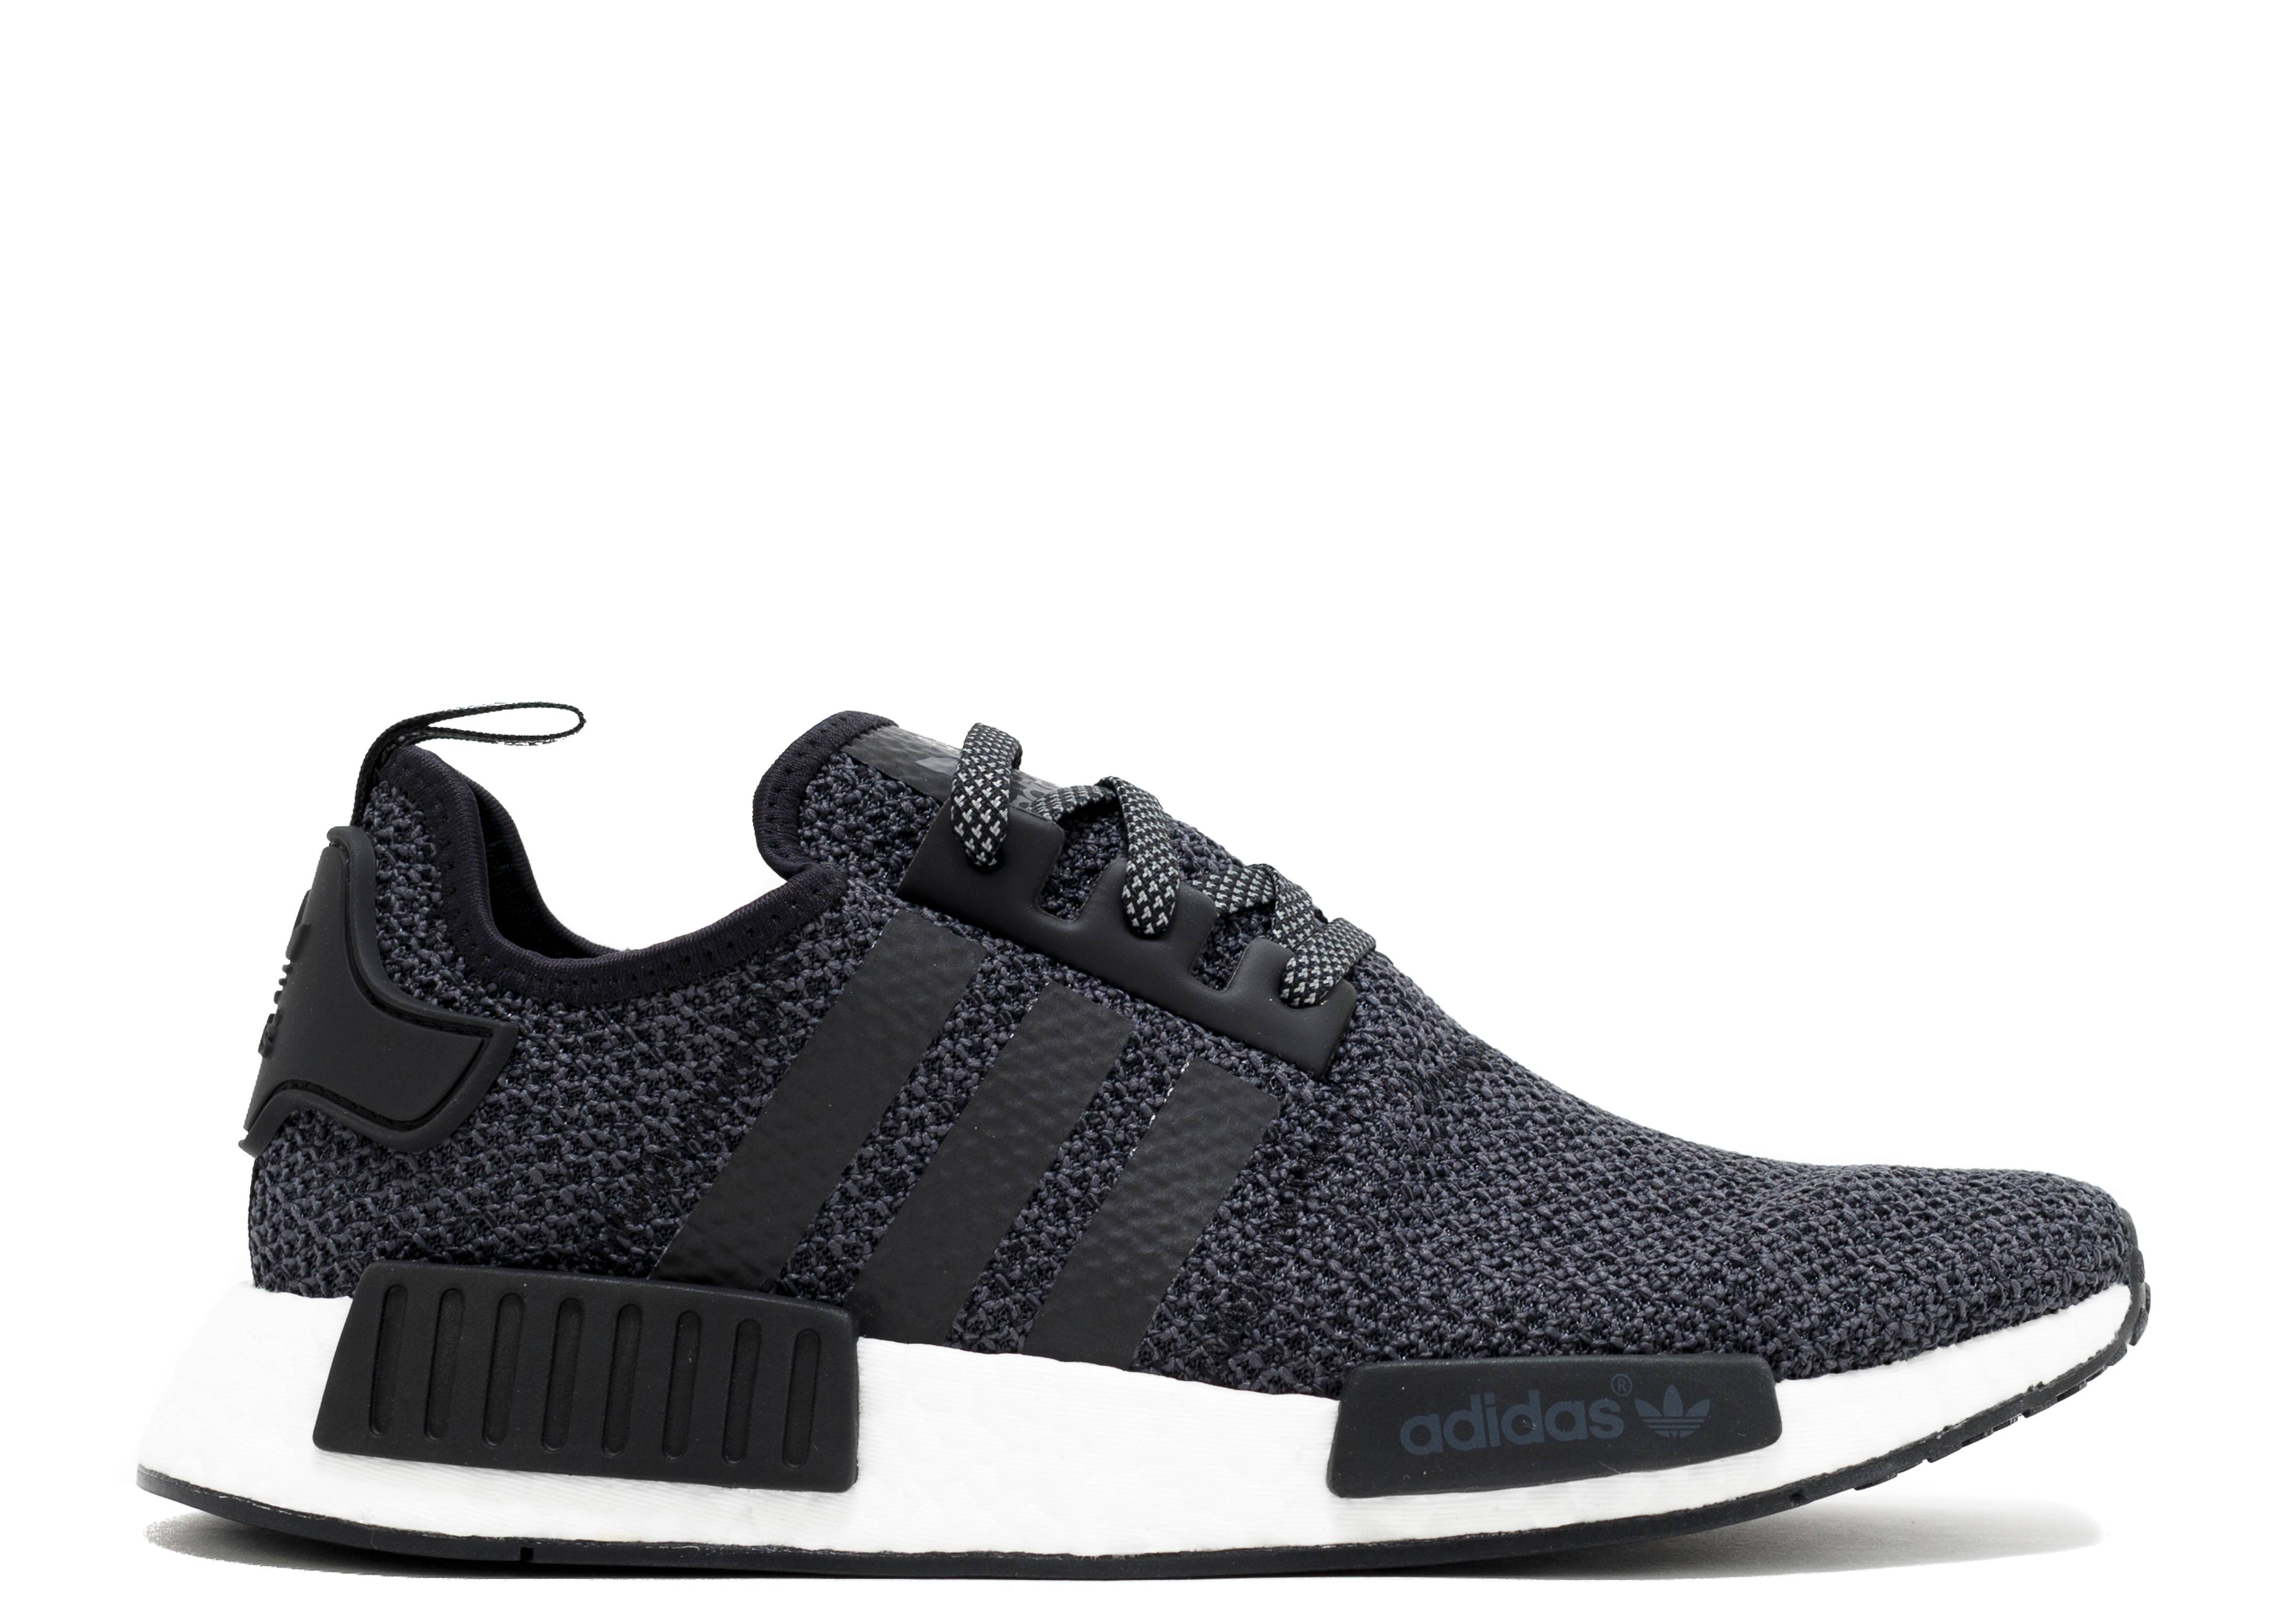 Champs Sports x NMD_R1 'Black Reflective'